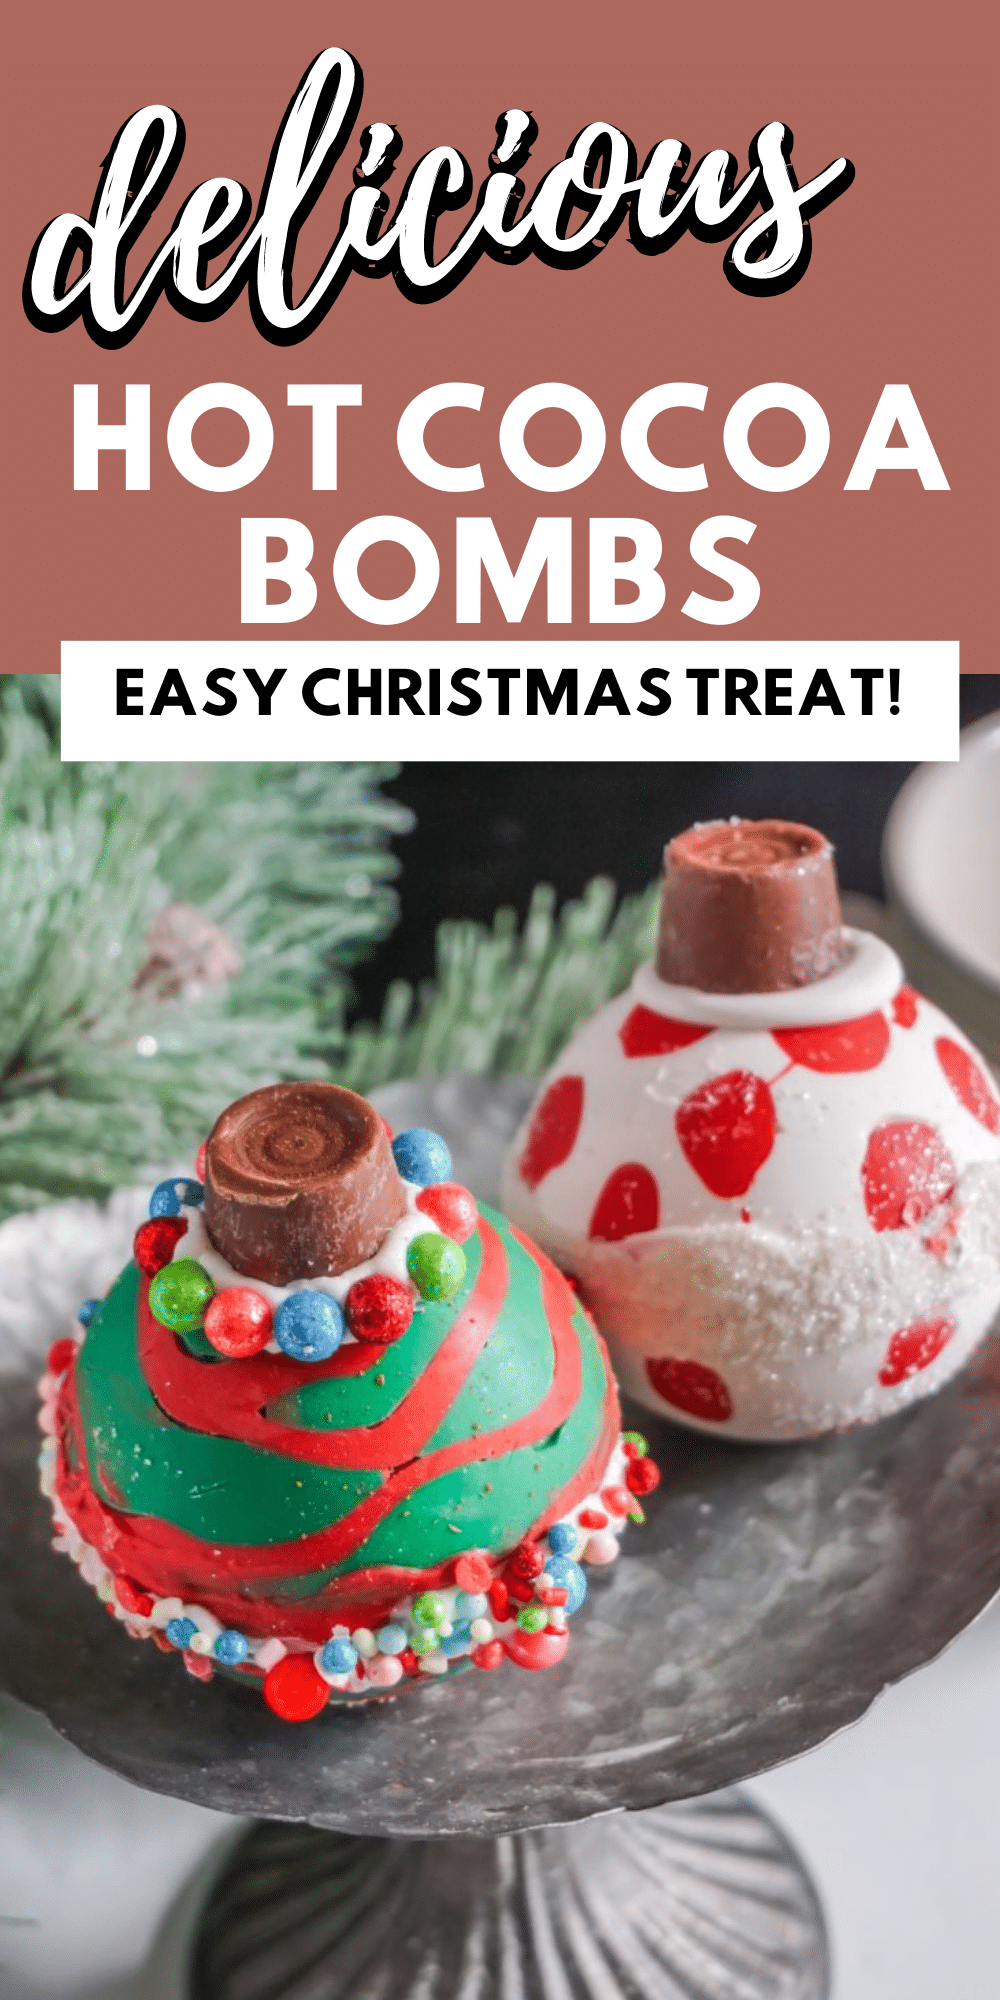 Just when you thought that the holiday season couldn't get any better, along comes these Christmas Ornament Hot Cocoa Bombs! #hotcocoabombs #hotcocoa #christmasornament #holidaytreats via @wondermomwannab